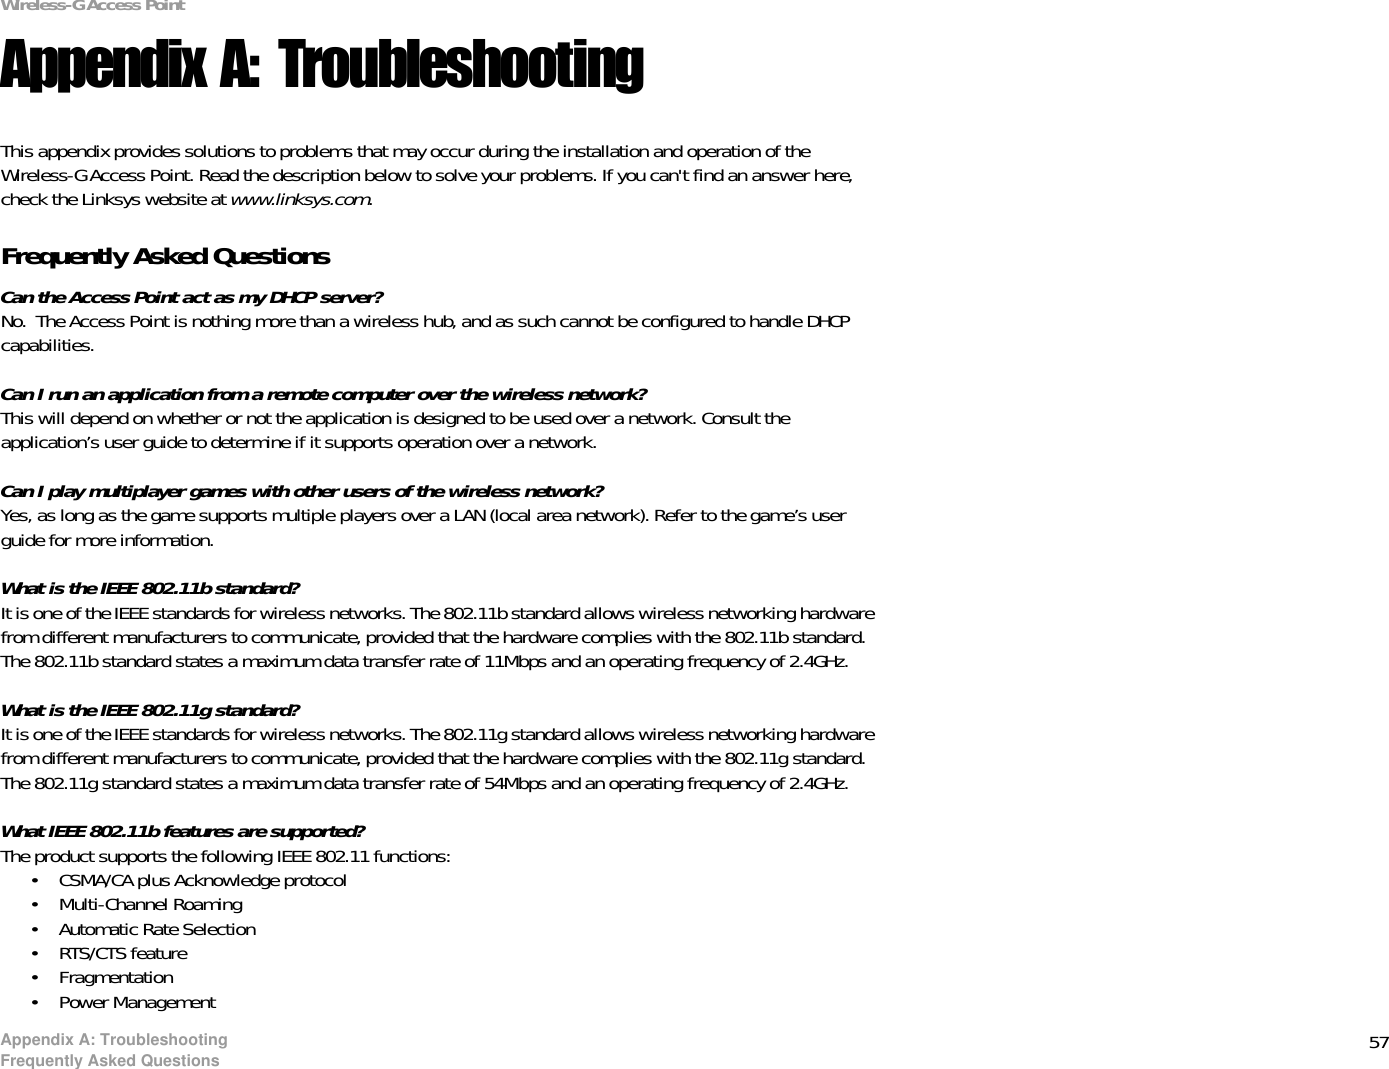 57Appendix A: TroubleshootingFrequently Asked QuestionsWireless-G Access PointAppendix A: TroubleshootingThis appendix provides solutions to problems that may occur during the installation and operation of the Wireless-G Access Point. Read the description below to solve your problems. If you can&apos;t find an answer here, check the Linksys website at www.linksys.com.Frequently Asked QuestionsCan the Access Point act as my DHCP server?No.  The Access Point is nothing more than a wireless hub, and as such cannot be configured to handle DHCP capabilities.Can I run an application from a remote computer over the wireless network?This will depend on whether or not the application is designed to be used over a network. Consult the application’s user guide to determine if it supports operation over a network.Can I play multiplayer games with other users of the wireless network?Yes, as long as the game supports multiple players over a LAN (local area network). Refer to the game’s user guide for more information.What is the IEEE 802.11b standard?It is one of the IEEE standards for wireless networks. The 802.11b standard allows wireless networking hardware from different manufacturers to communicate, provided that the hardware complies with the 802.11b standard. The 802.11b standard states a maximum data transfer rate of 11Mbps and an operating frequency of 2.4GHz.What is the IEEE 802.11g standard?It is one of the IEEE standards for wireless networks. The 802.11g standard allows wireless networking hardware from different manufacturers to communicate, provided that the hardware complies with the 802.11g standard. The 802.11g standard states a maximum data transfer rate of 54Mbps and an operating frequency of 2.4GHz.What IEEE 802.11b features are supported?The product supports the following IEEE 802.11 functions: • CSMA/CA plus Acknowledge protocol • Multi-Channel Roaming • Automatic Rate Selection • RTS/CTS feature • Fragmentation • Power Management 